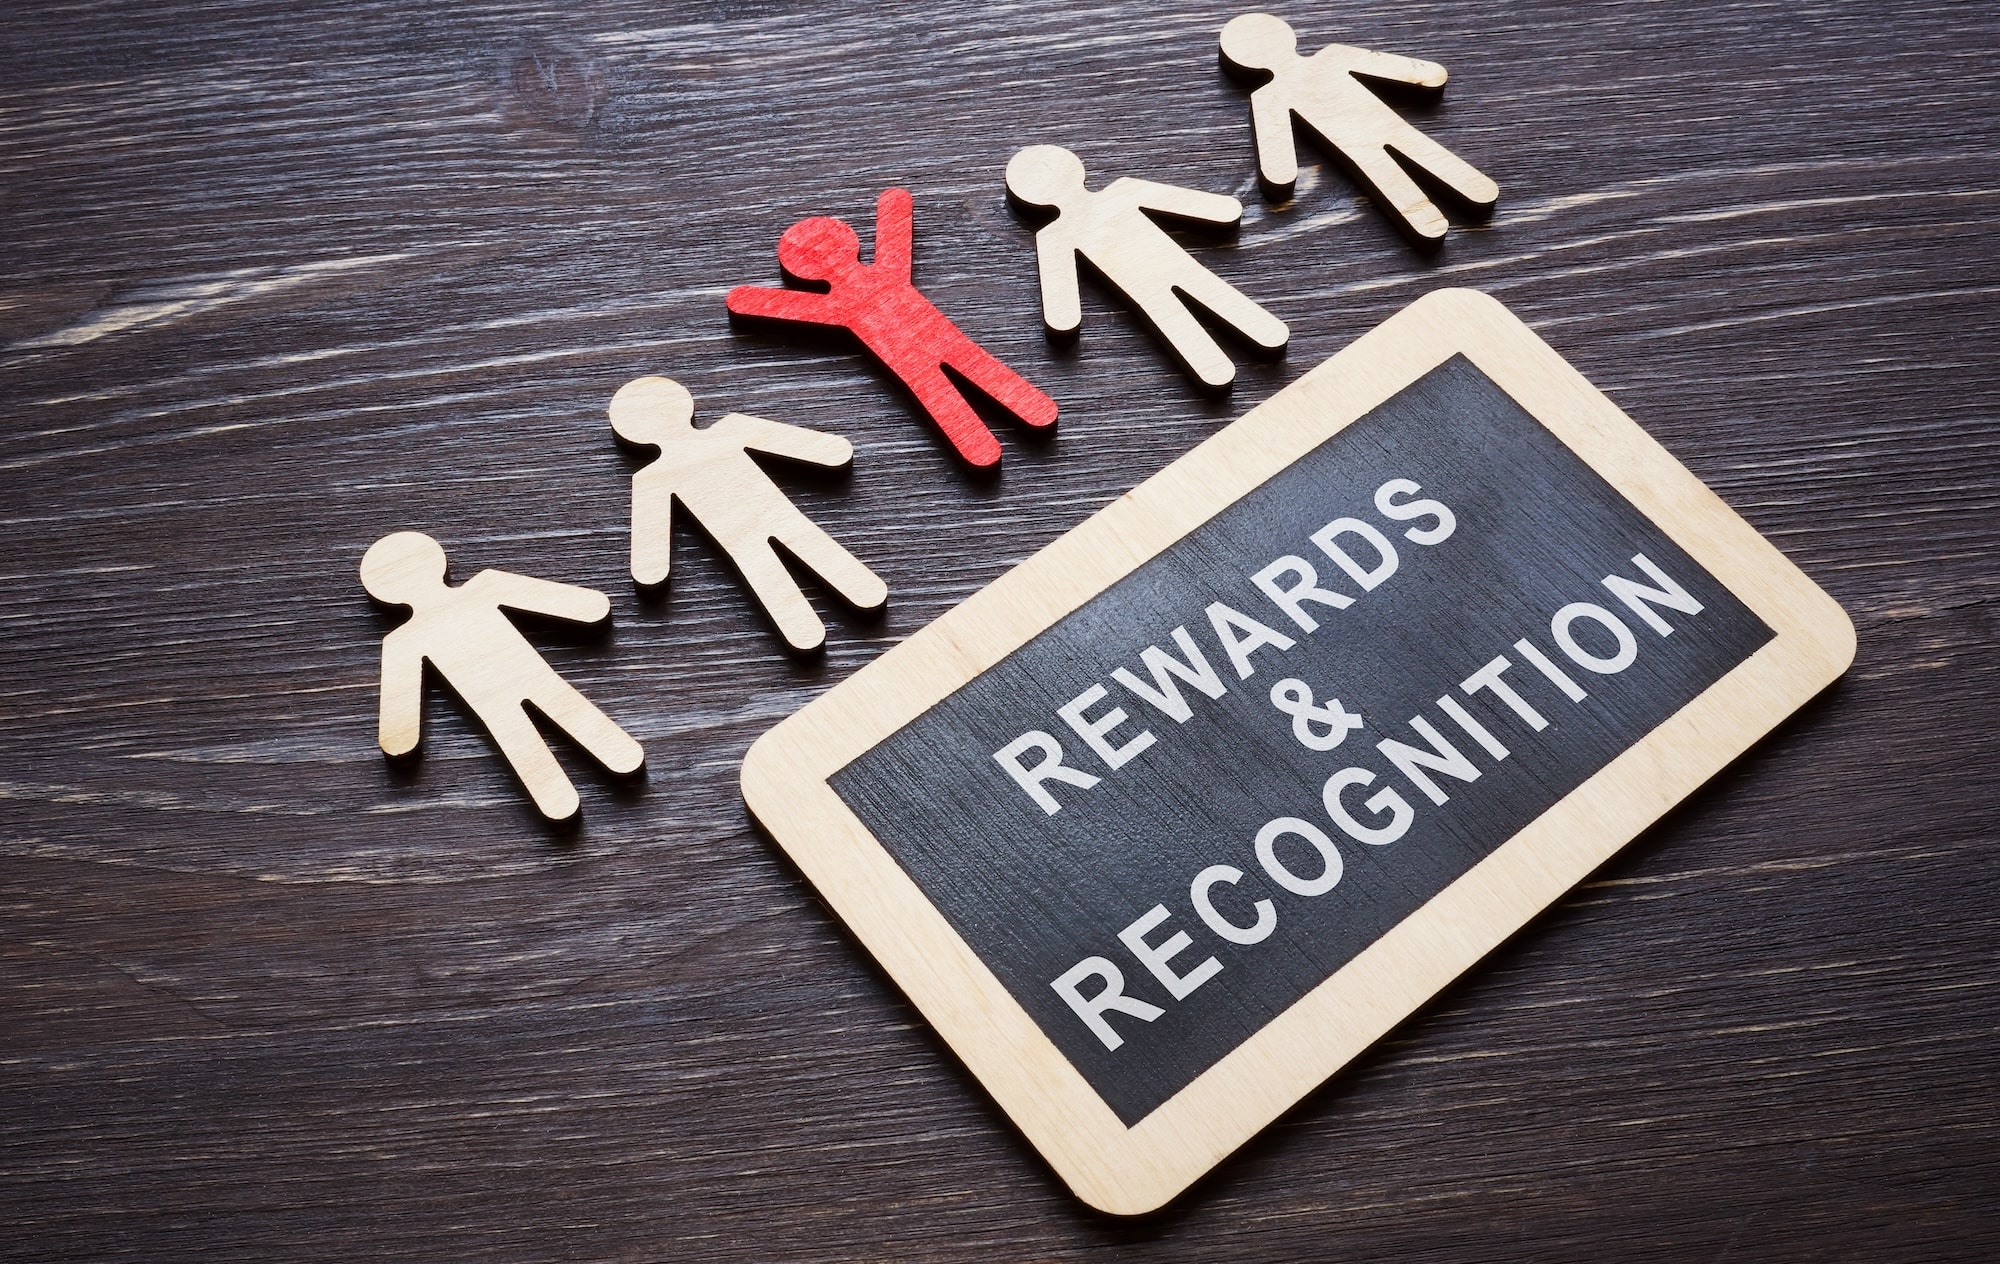 How to build an employee recognition pyramid with peer-to-peer recognition